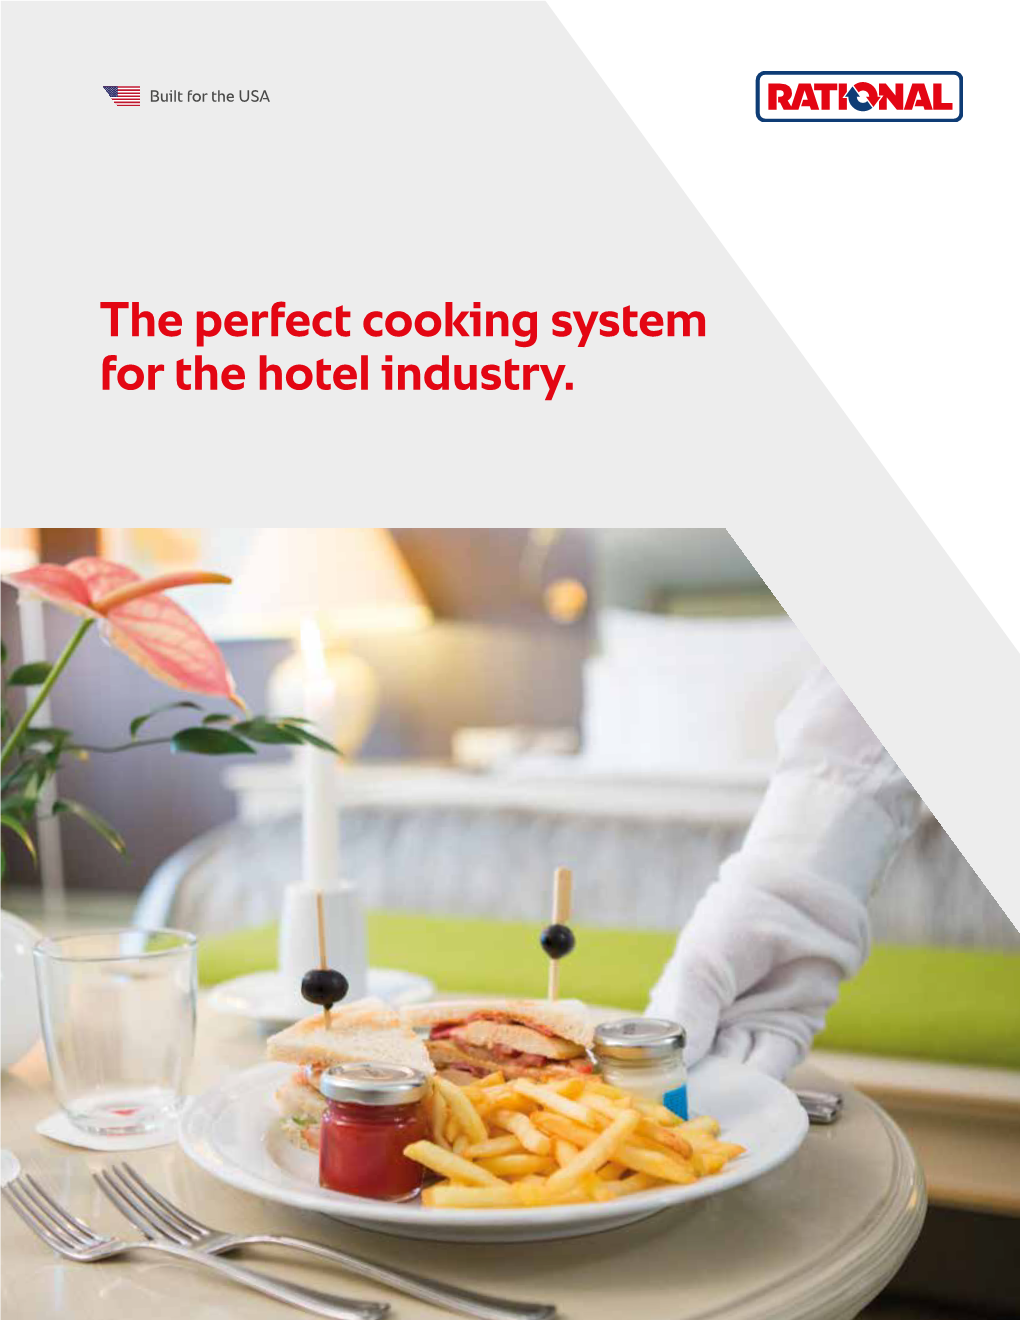 The Perfect Cooking System for the Hotel Industry. Ideas That Change the World